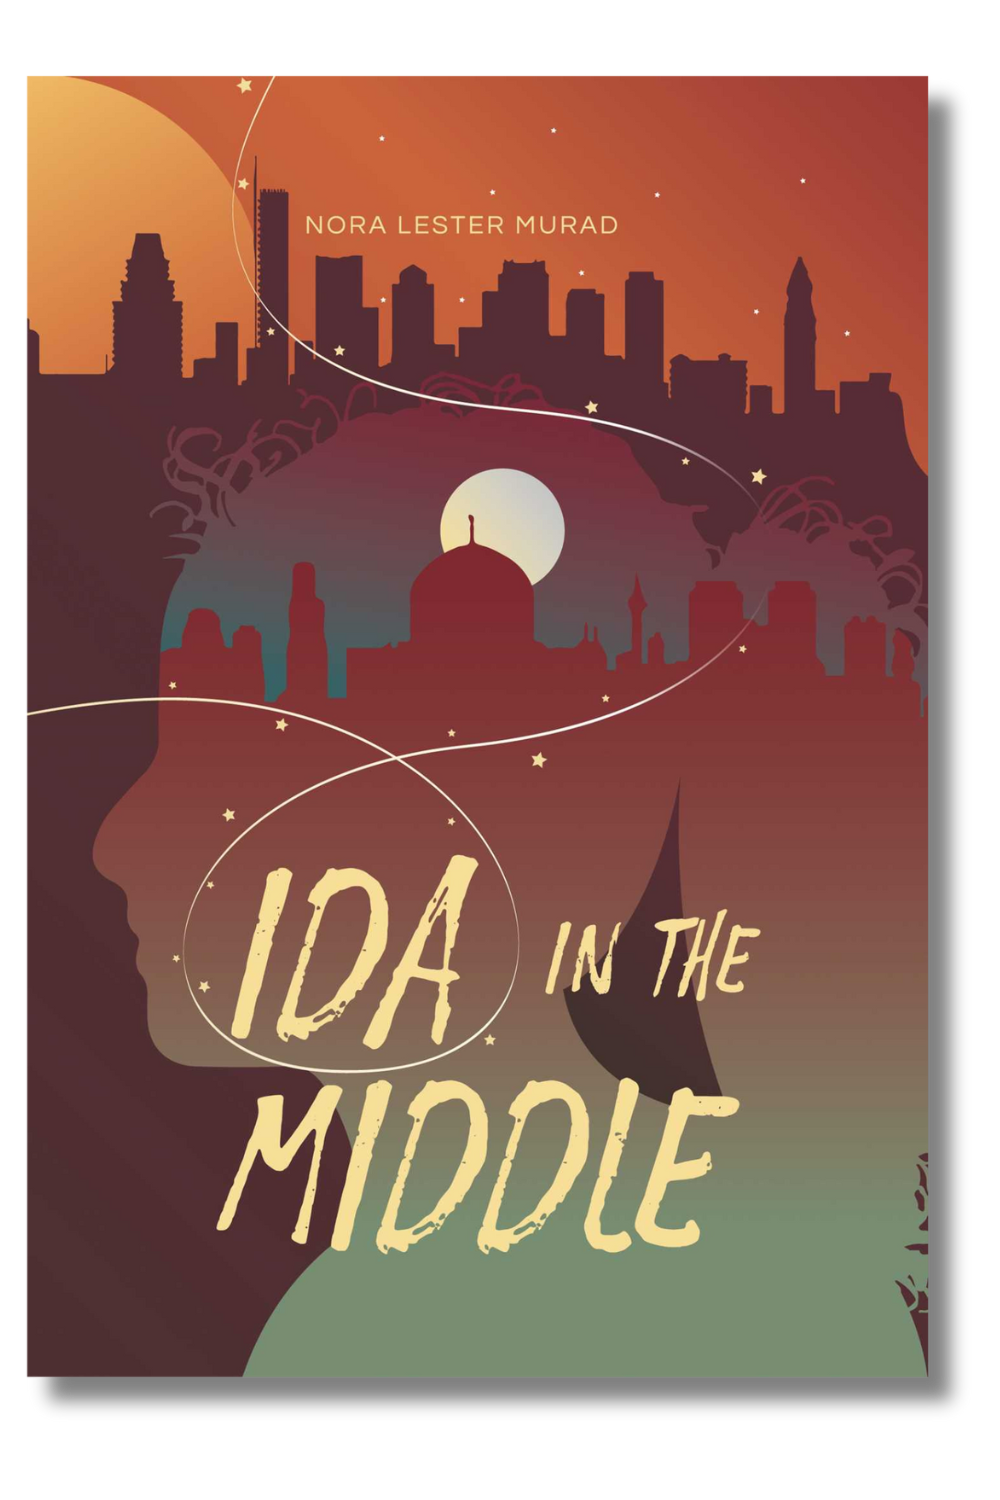 The cover of "Ida in the Middle" by Nora Lester Murad